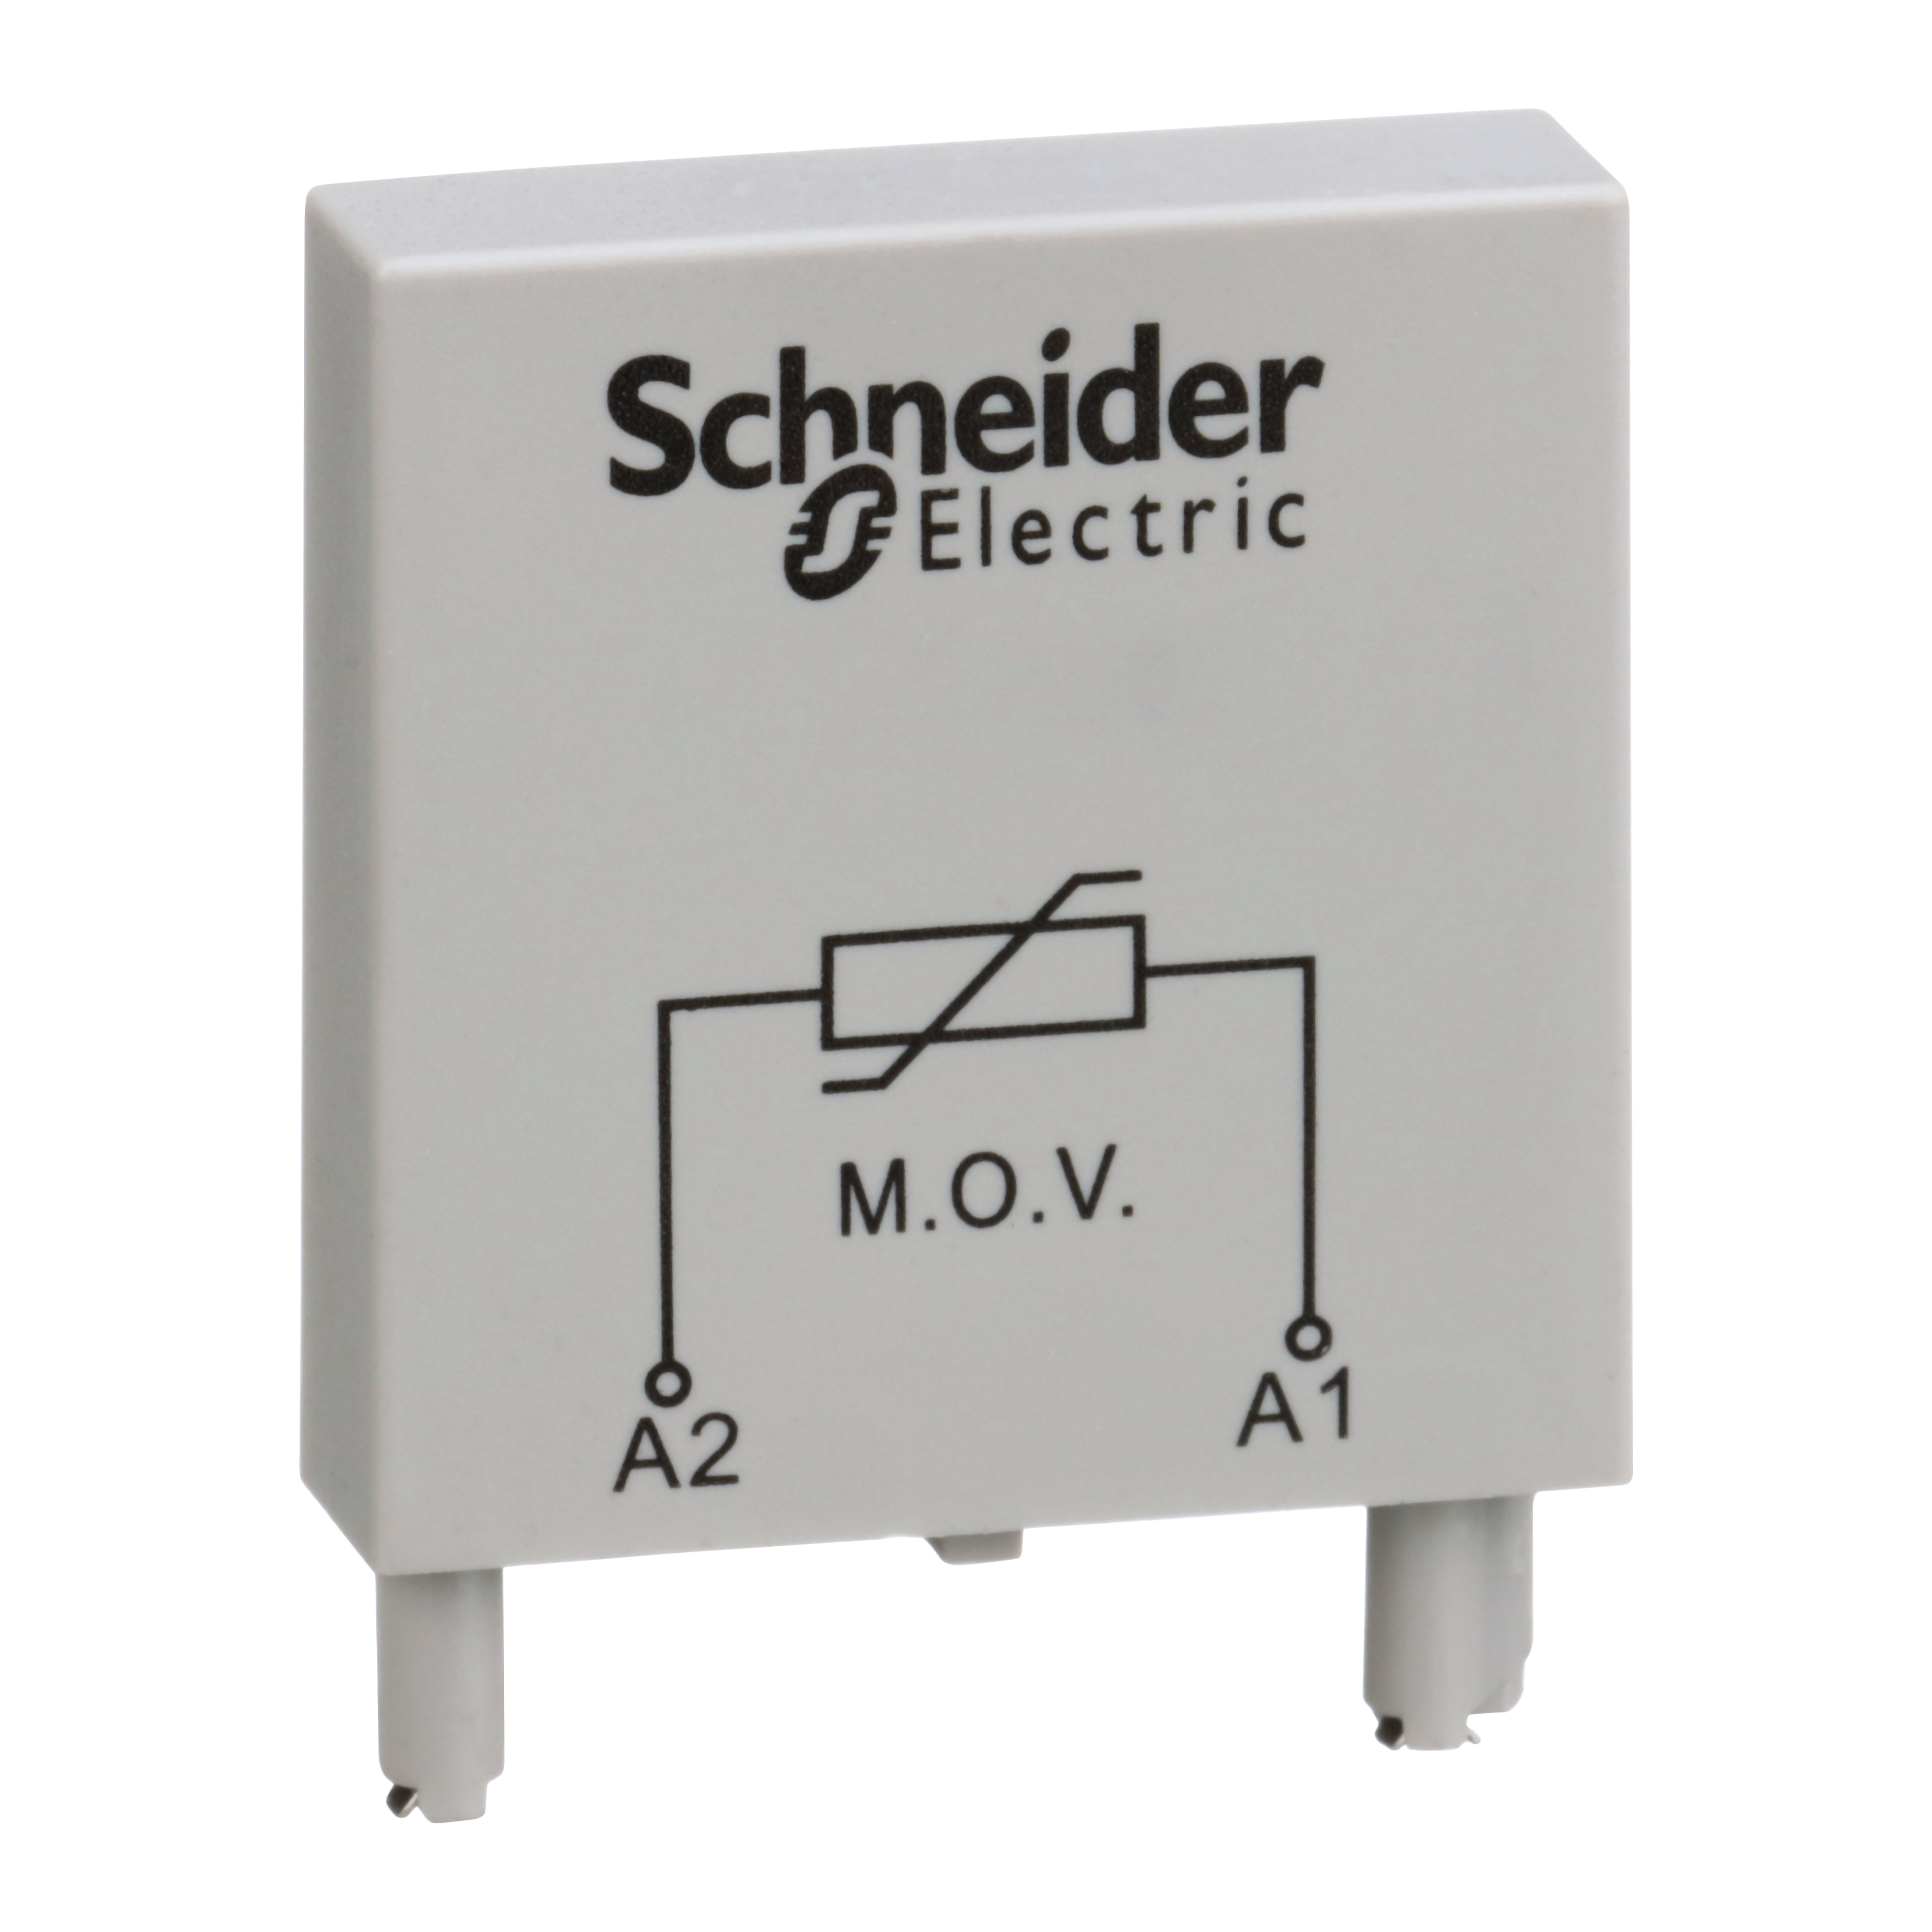 Protection module with MOV suppressor, SE Relays, for 725 power relays, 240VAC/VDC